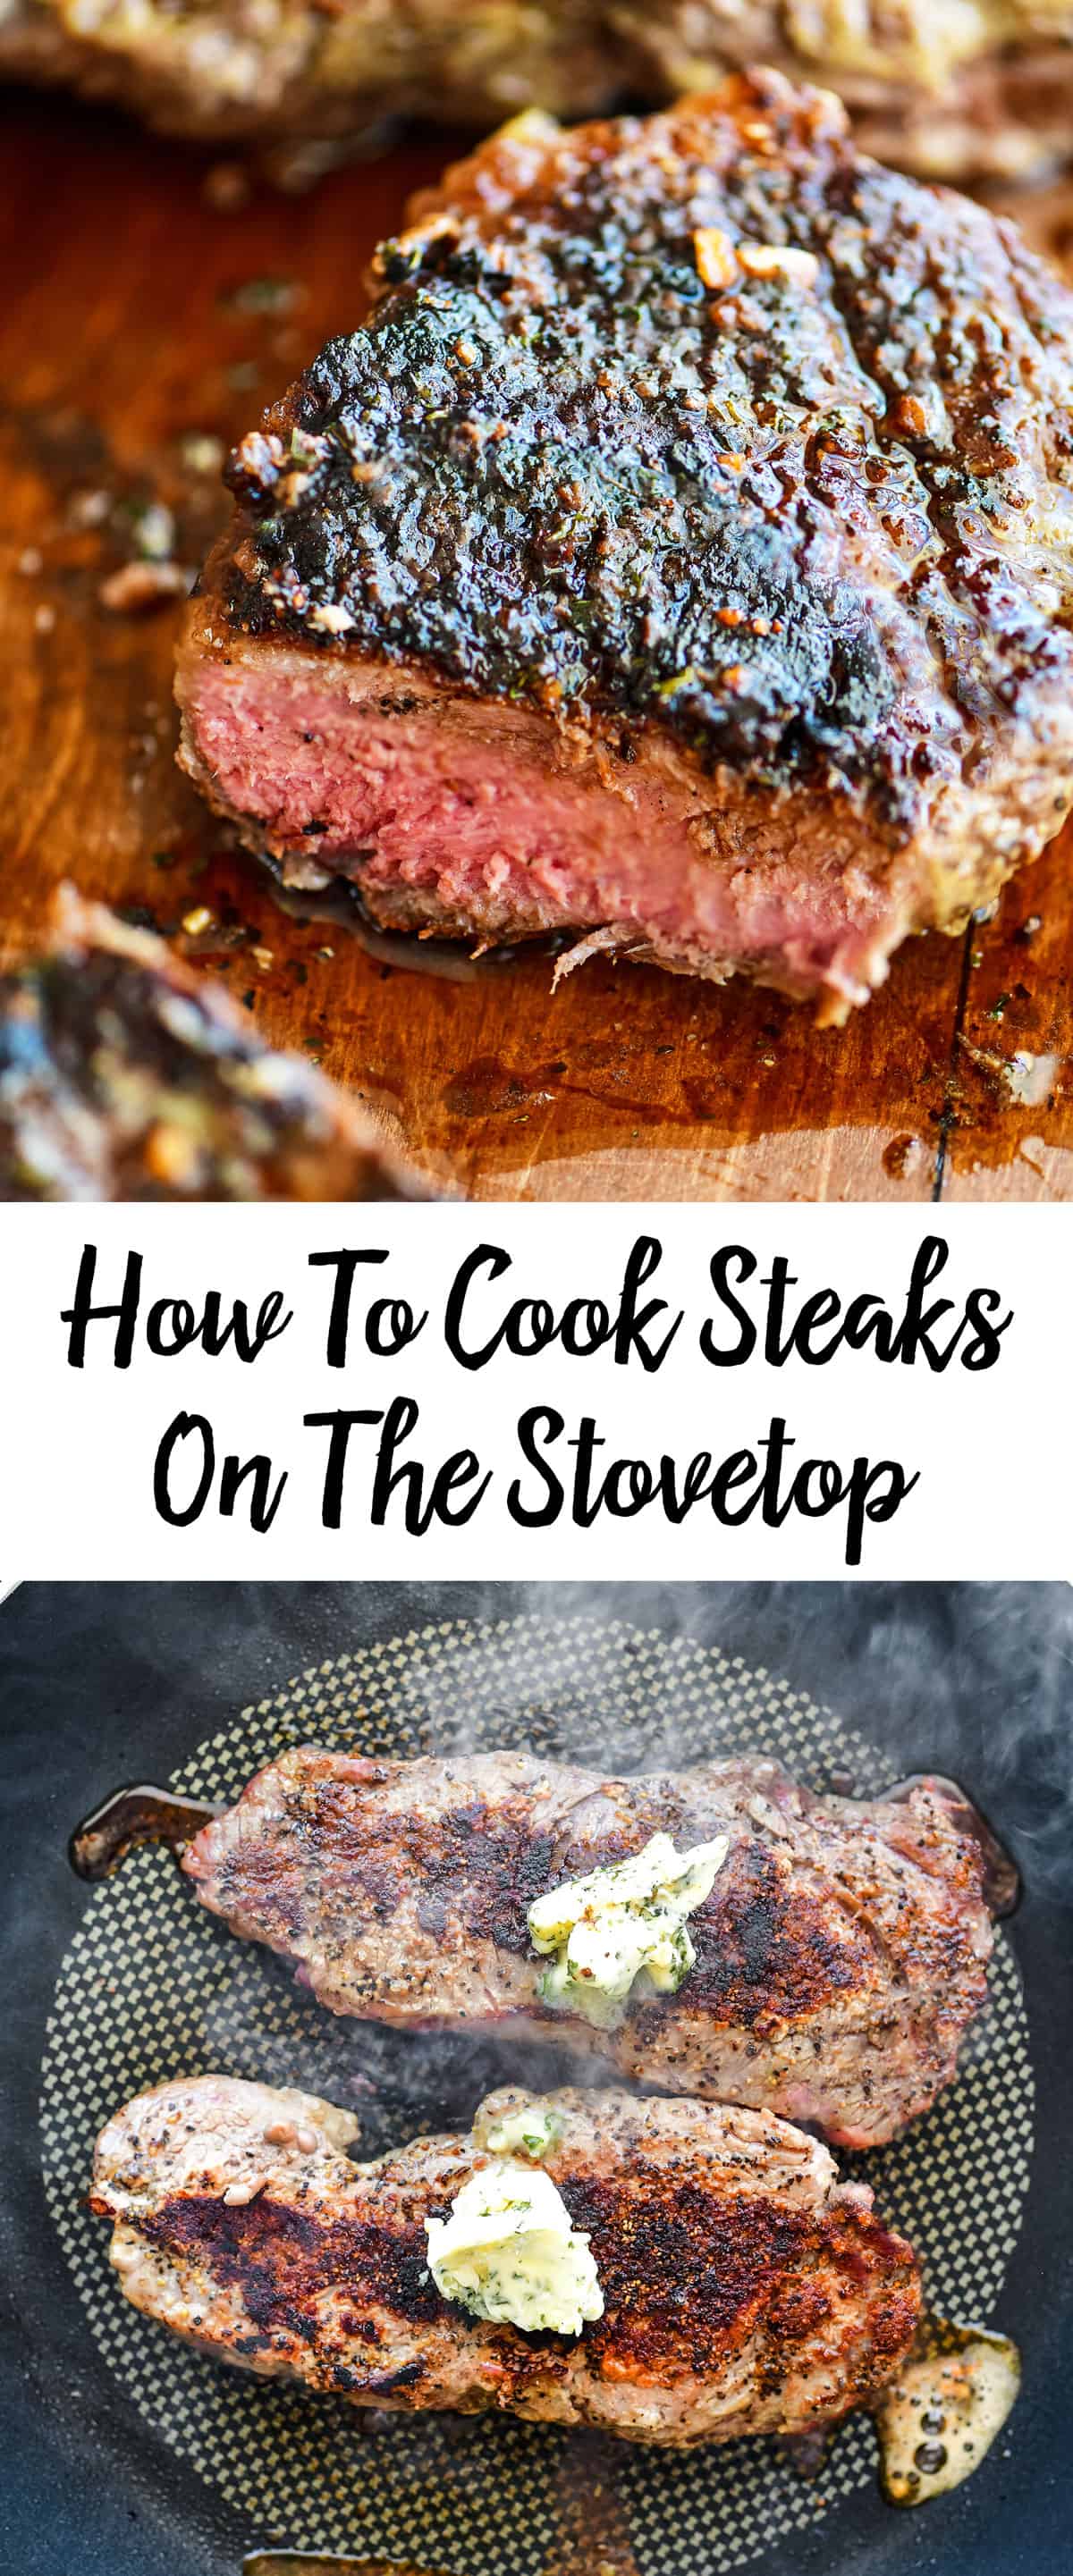 https://www.thegunnysack.com/wp-content/uploads/2019/03/How-To-Cook-Steaks-On-The-Stovetop-Pin.jpg